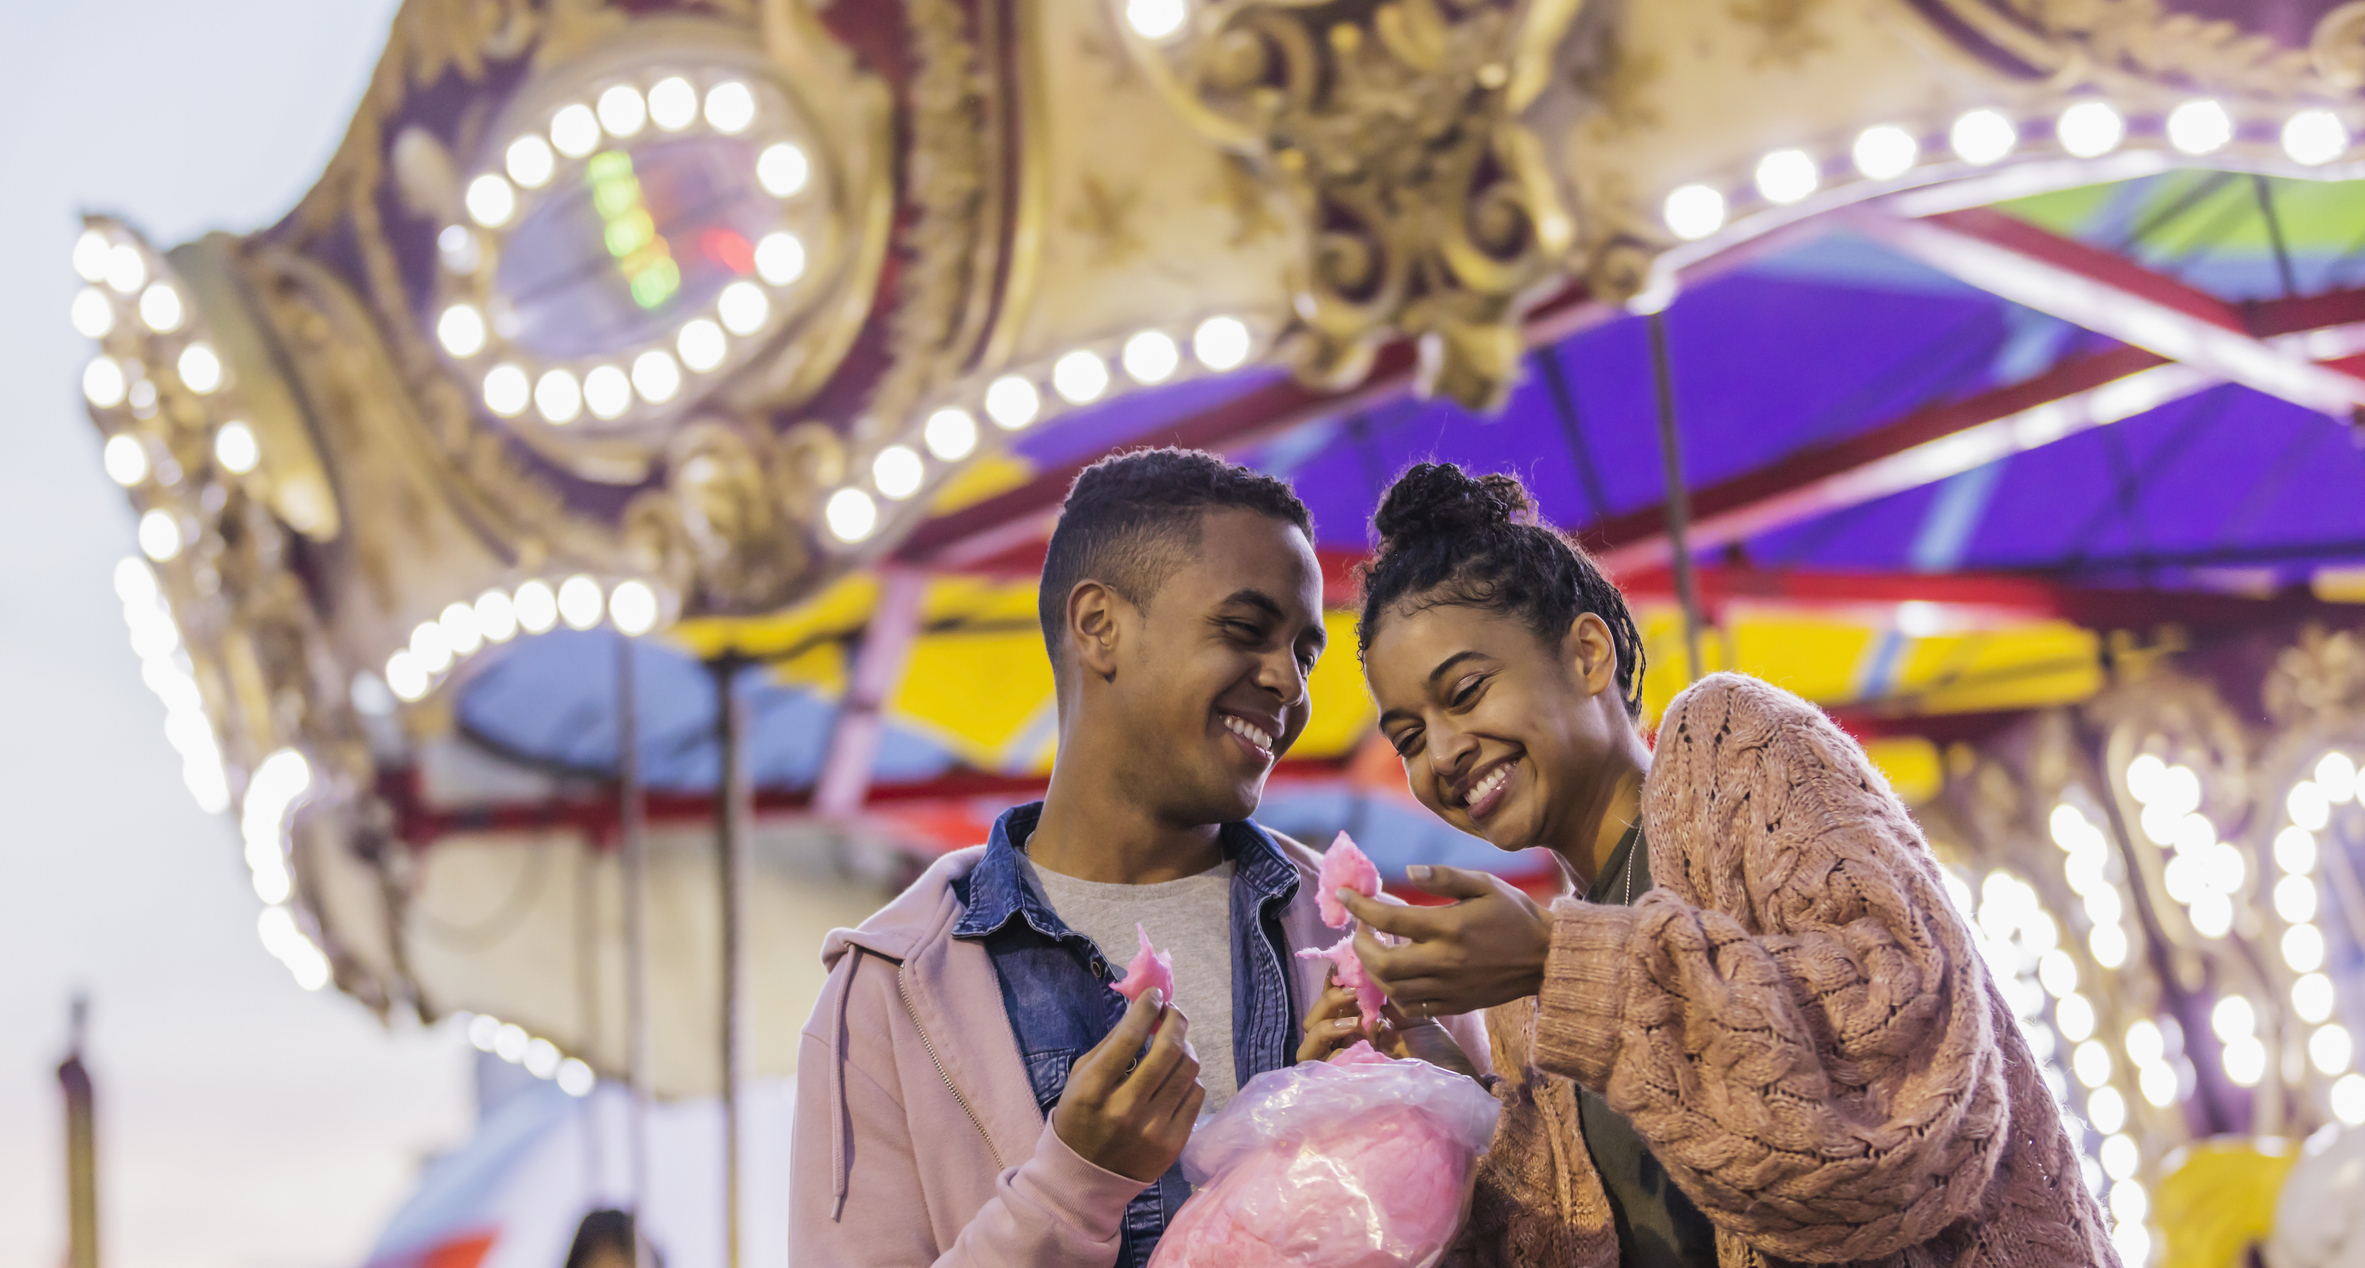 A couple sharing cotton candy and smiling at a carnival